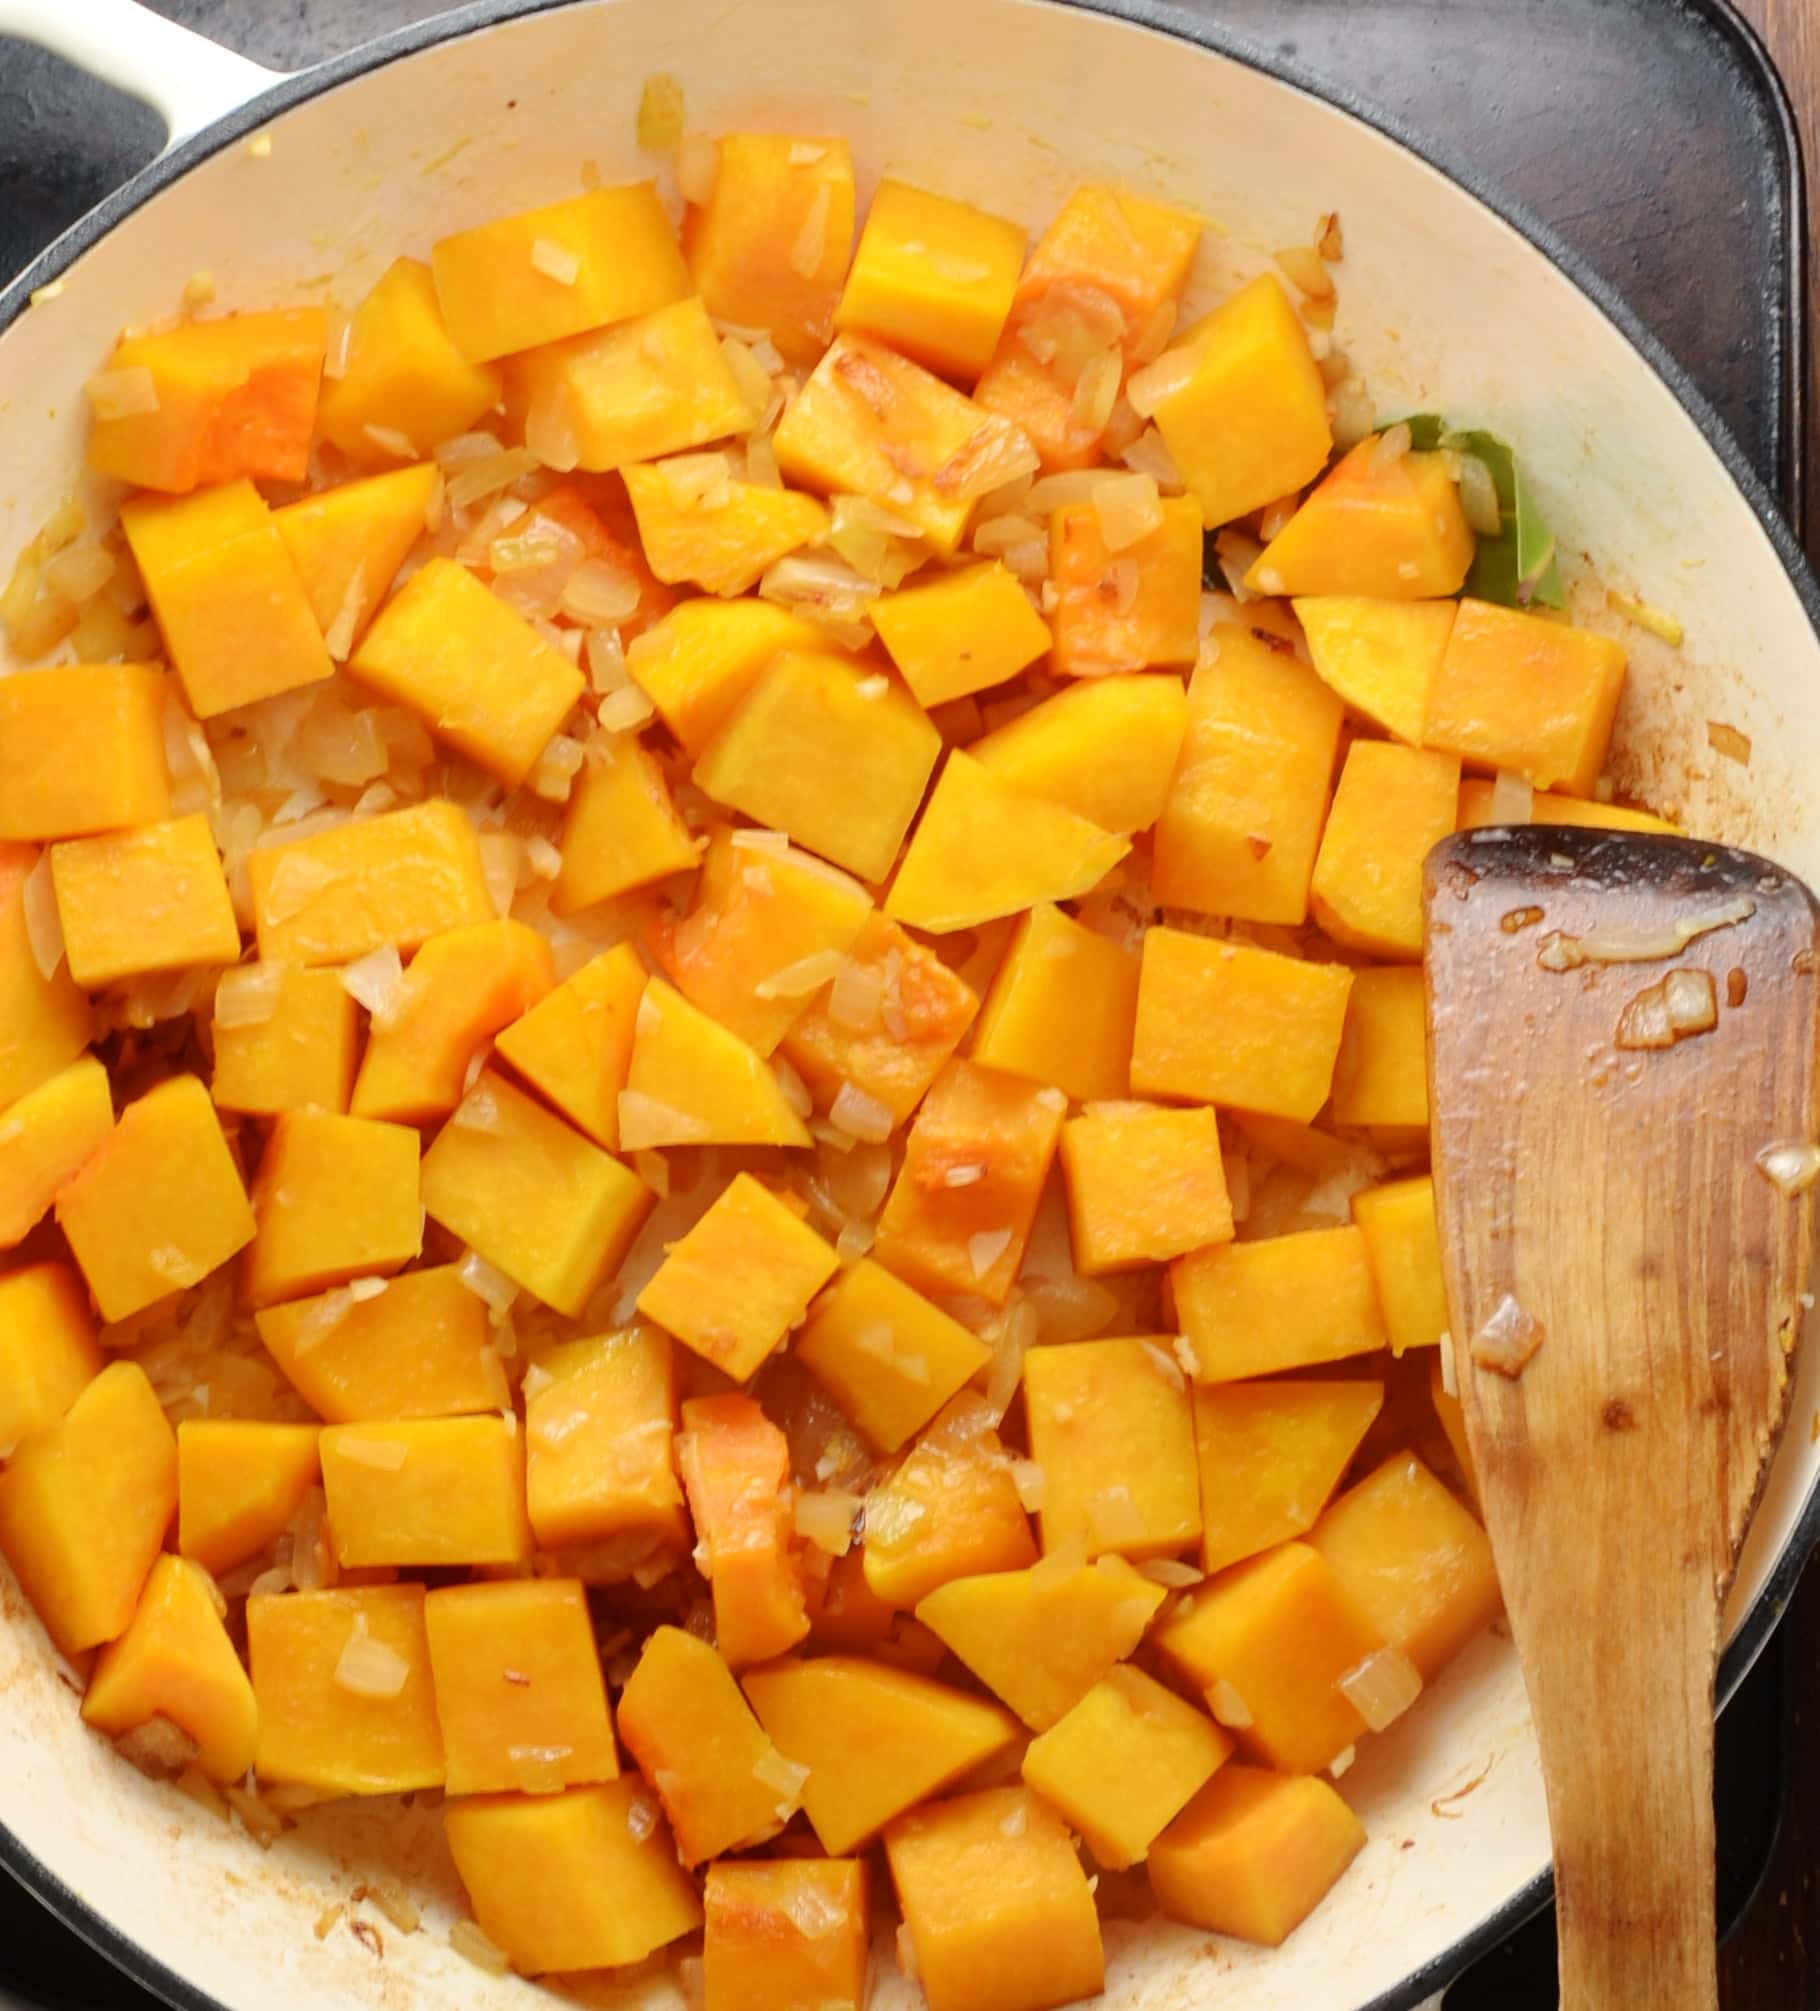 Top down view of cubed butternut squash with onions in large shallow white dish with wooden spoon.